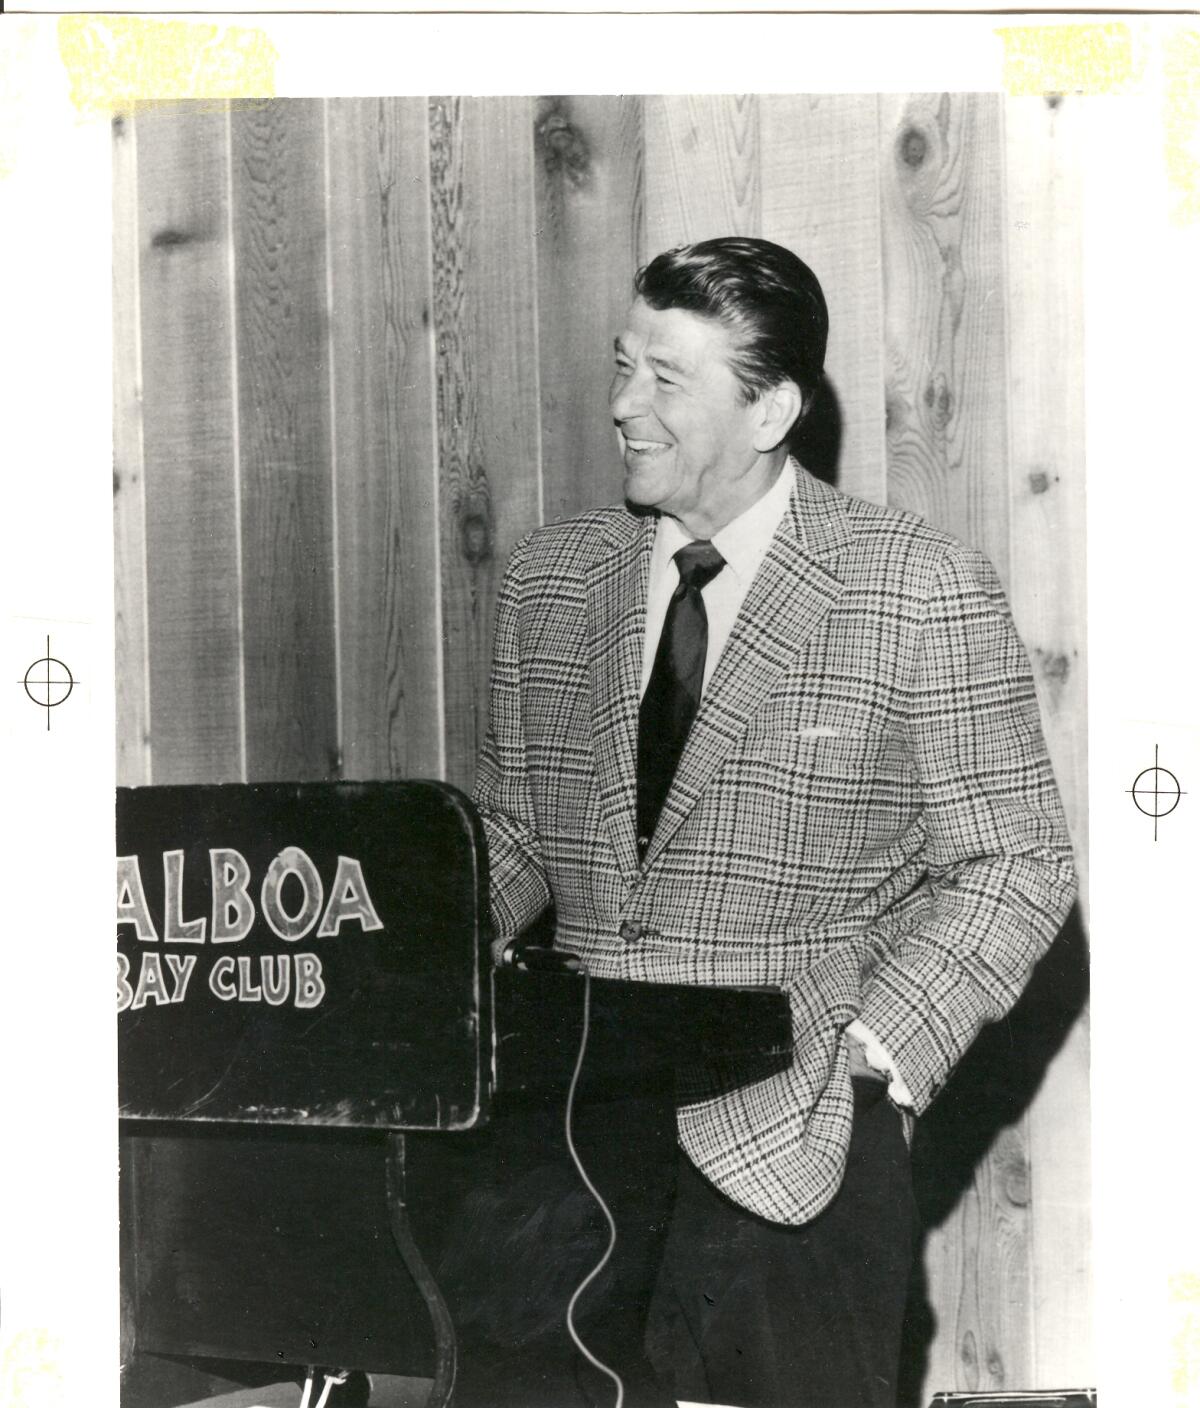 Former President Ronald Reagan speaks at the Balboa Bay Club in this undated photo.